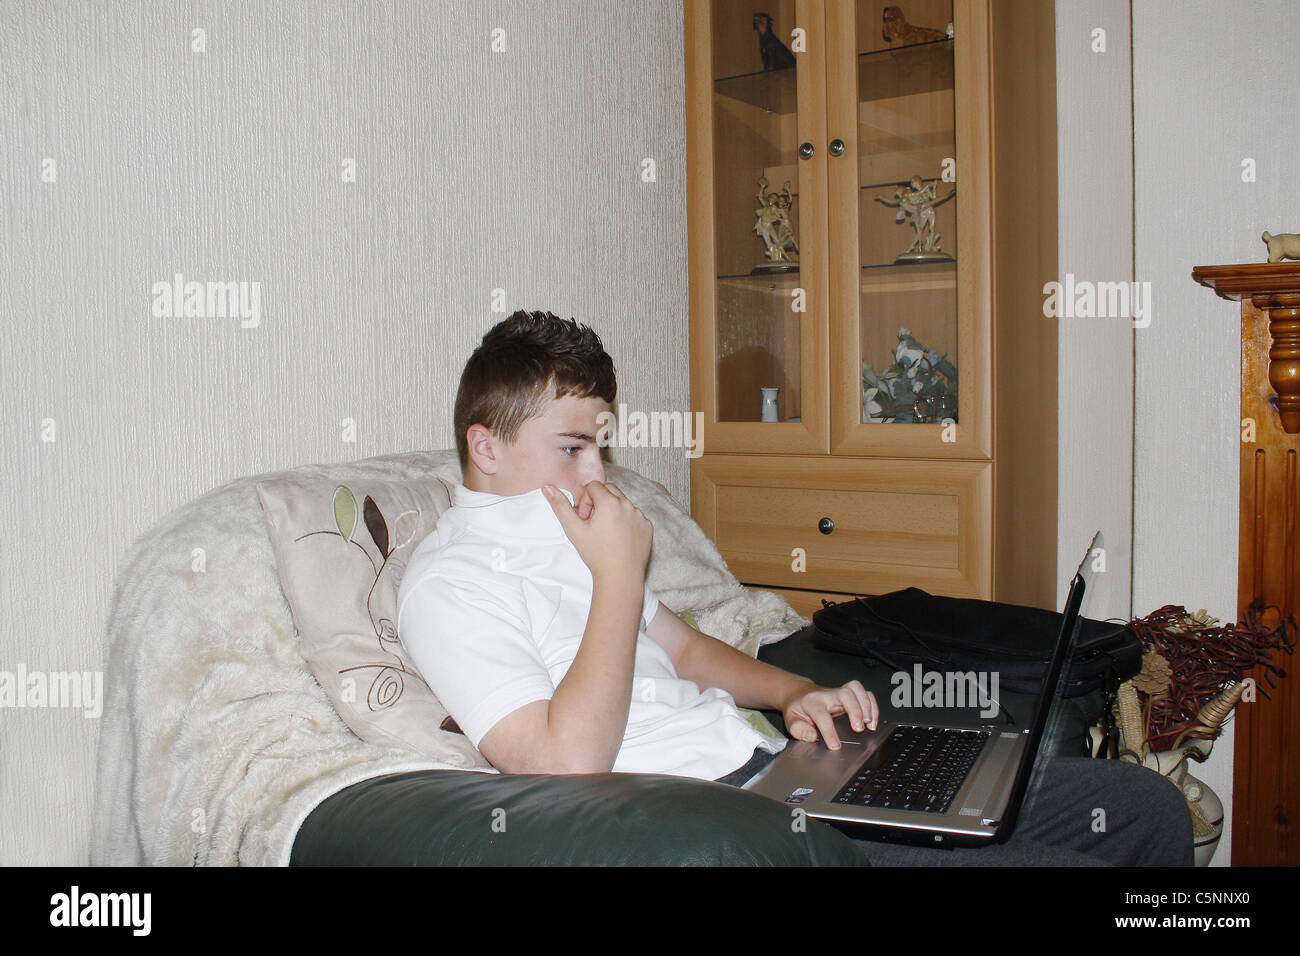 image of teenage boy on laptop in house Stock Photo